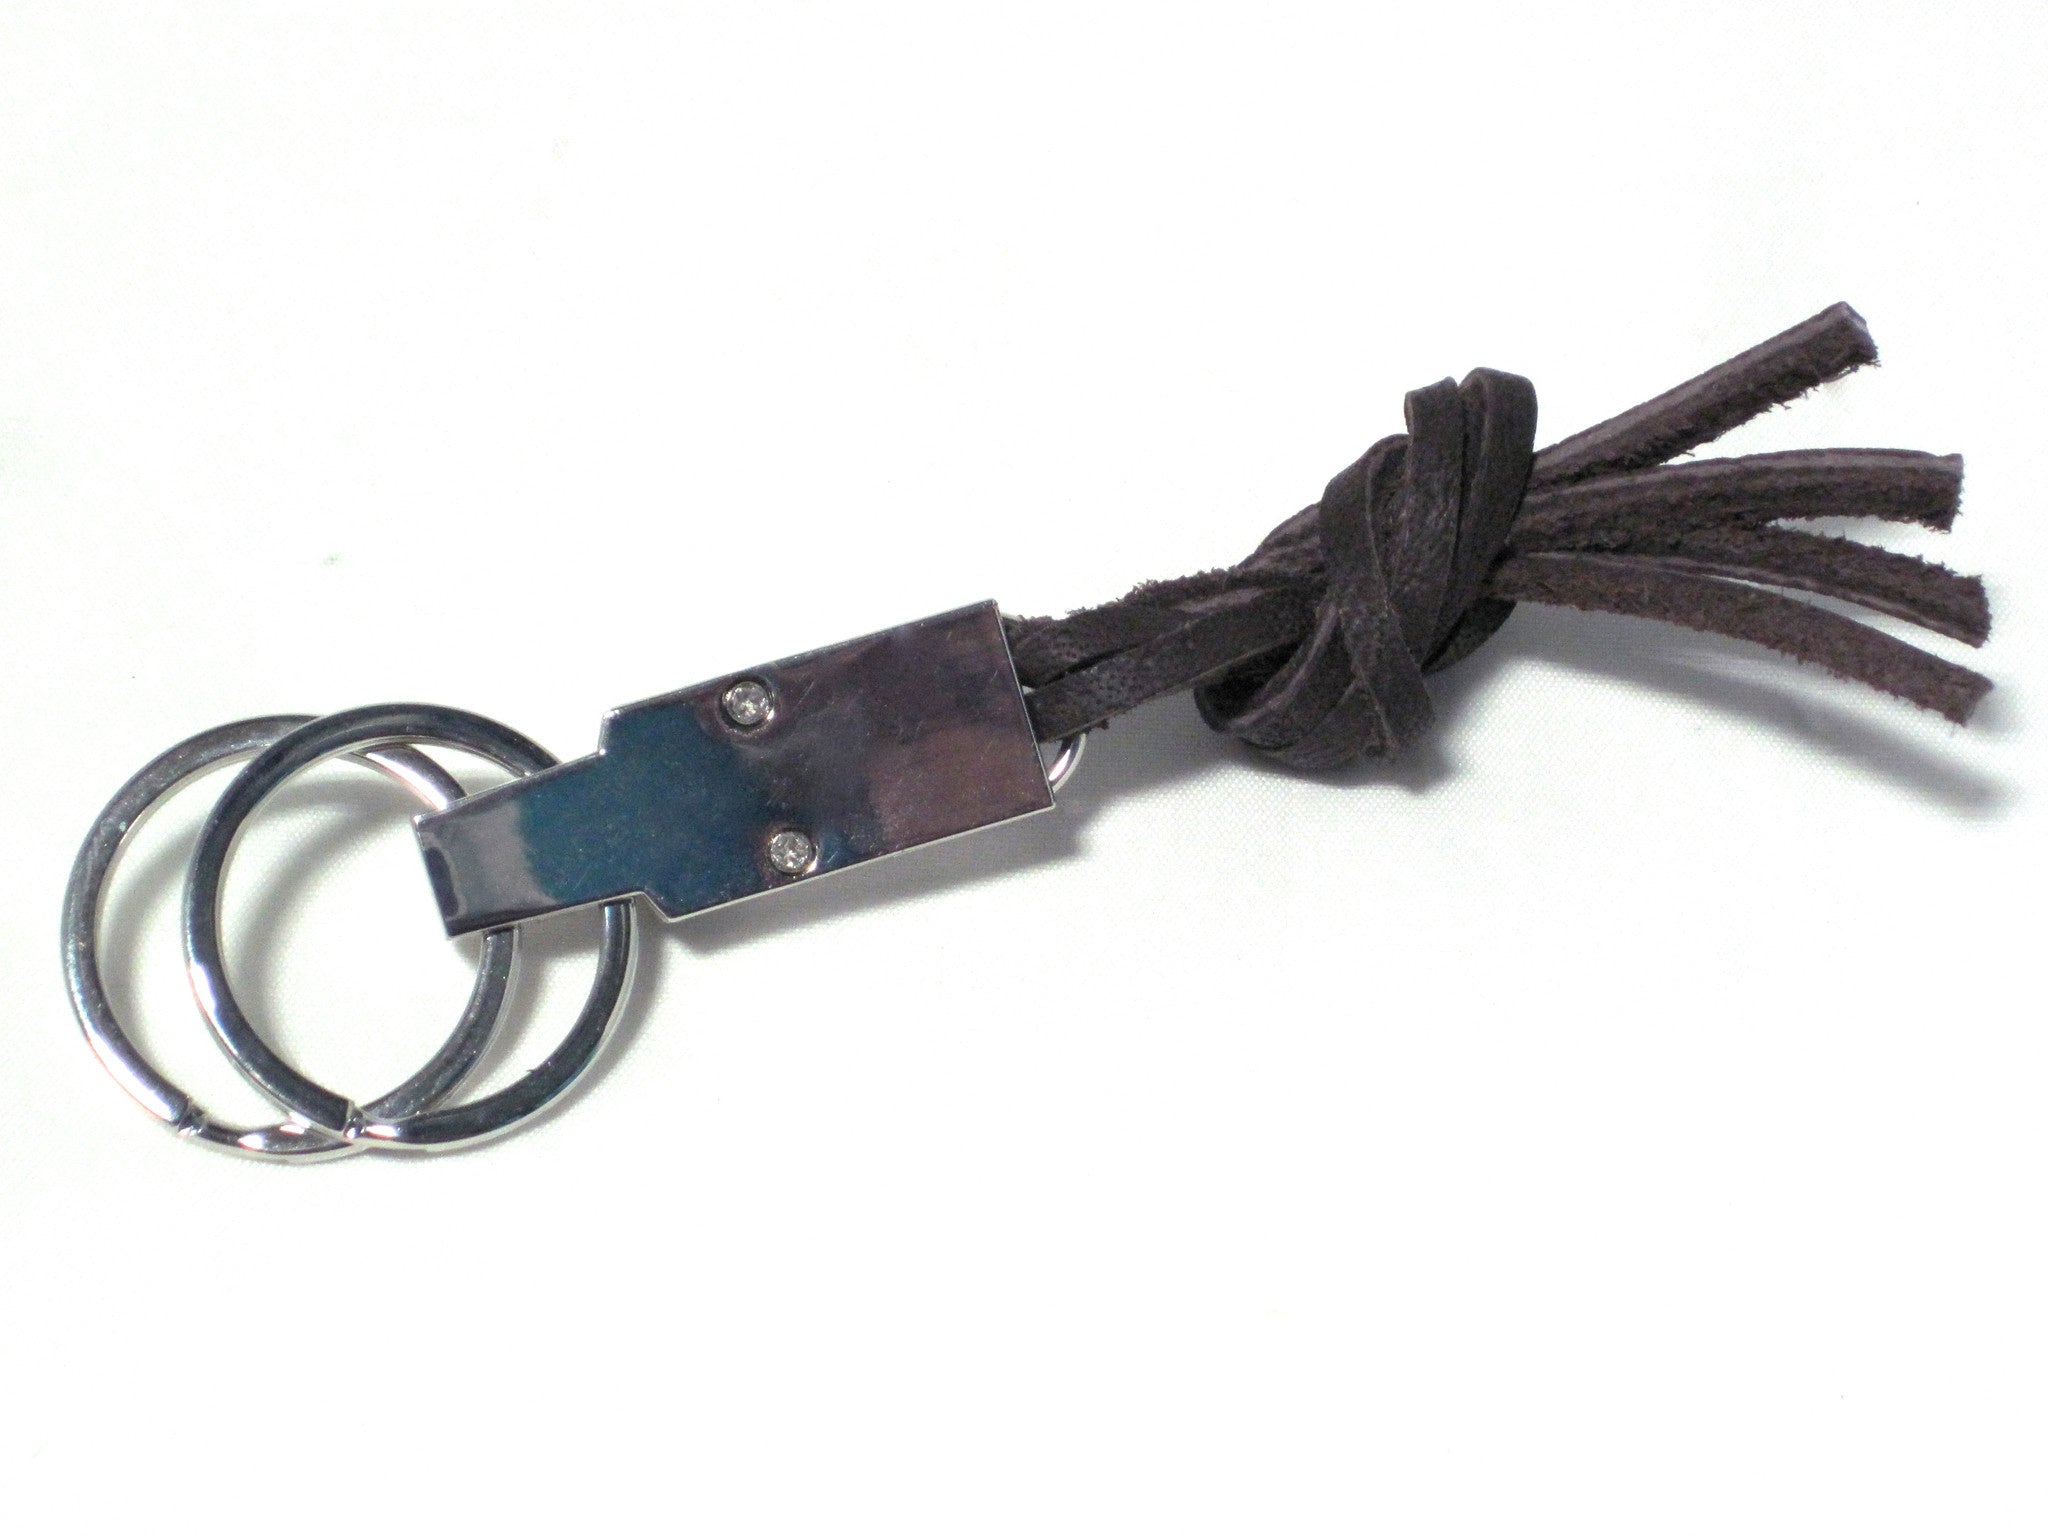 Leather knot key chain by nyet jewelry.